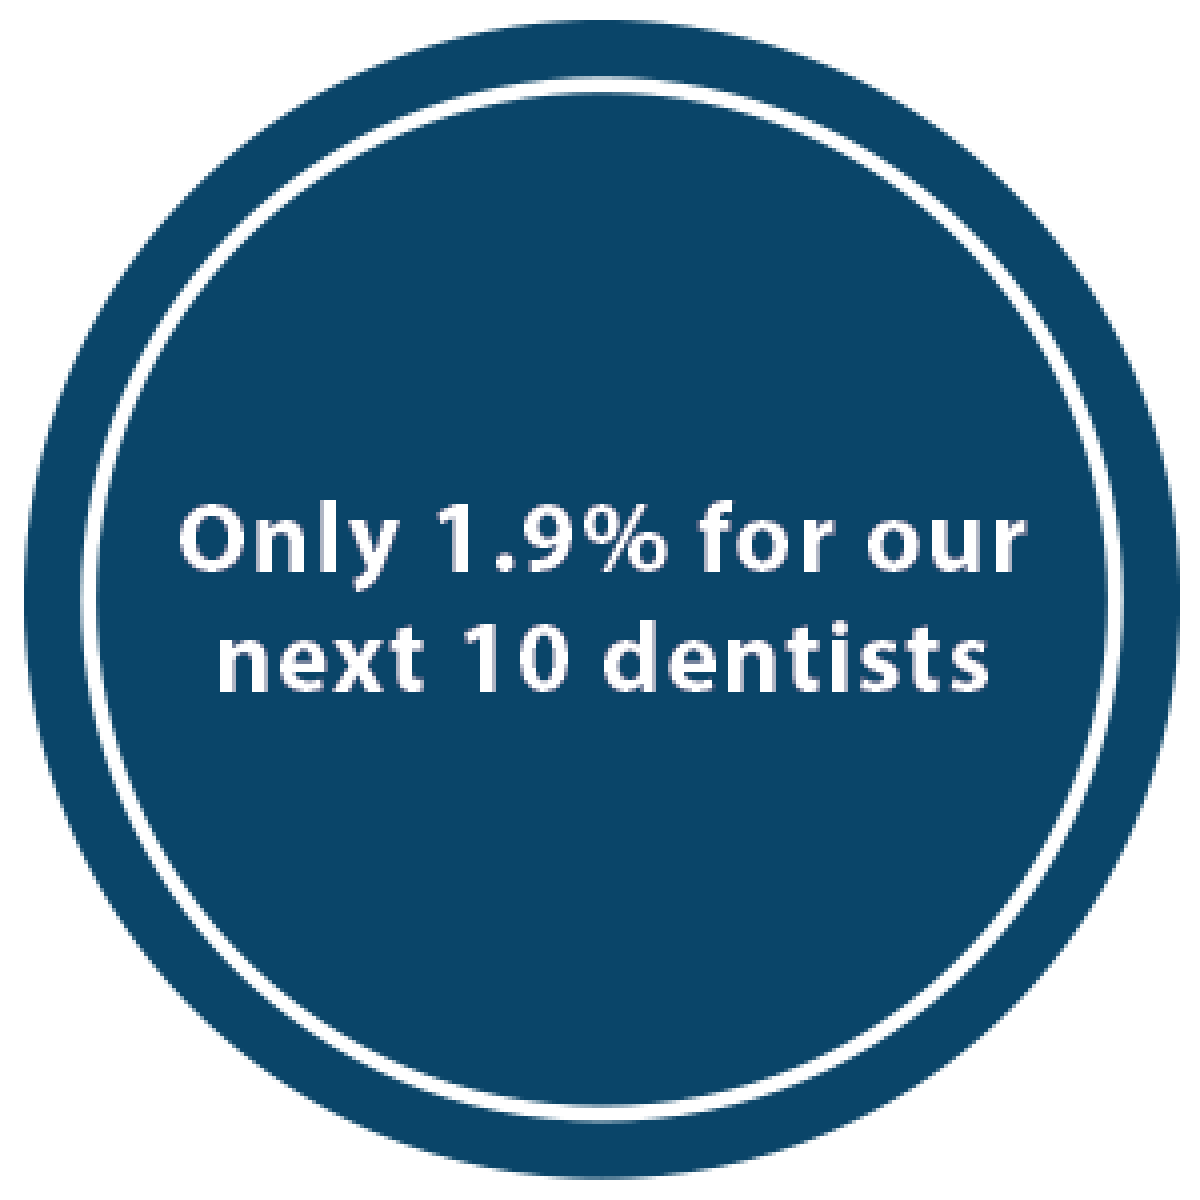 Only 1.9% for our next 10 dentists